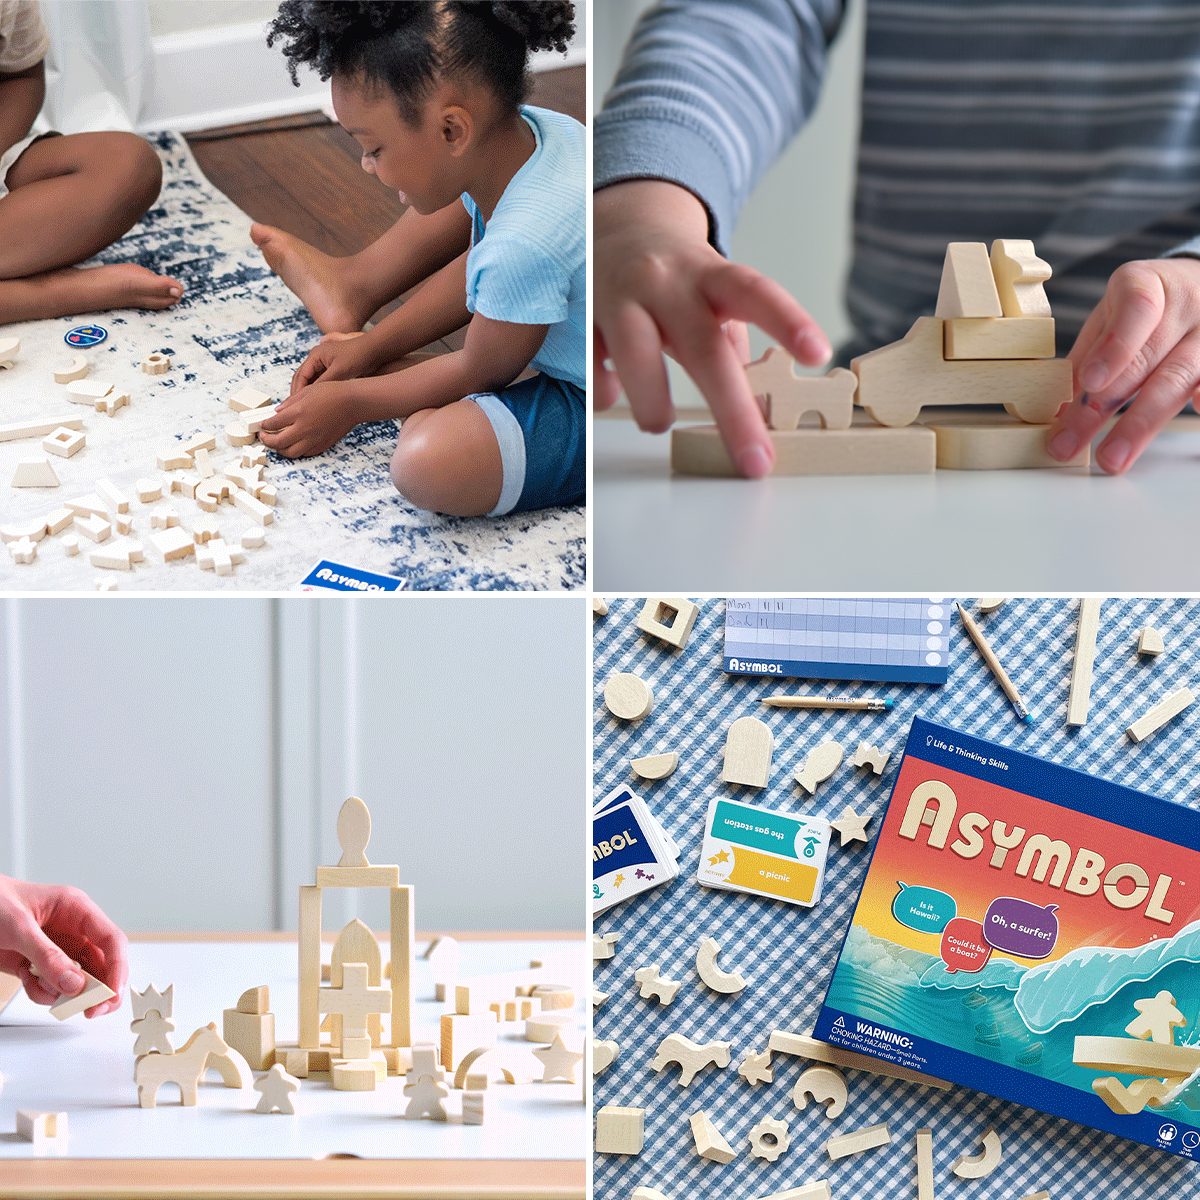 Asymbol: A creative game for family game night